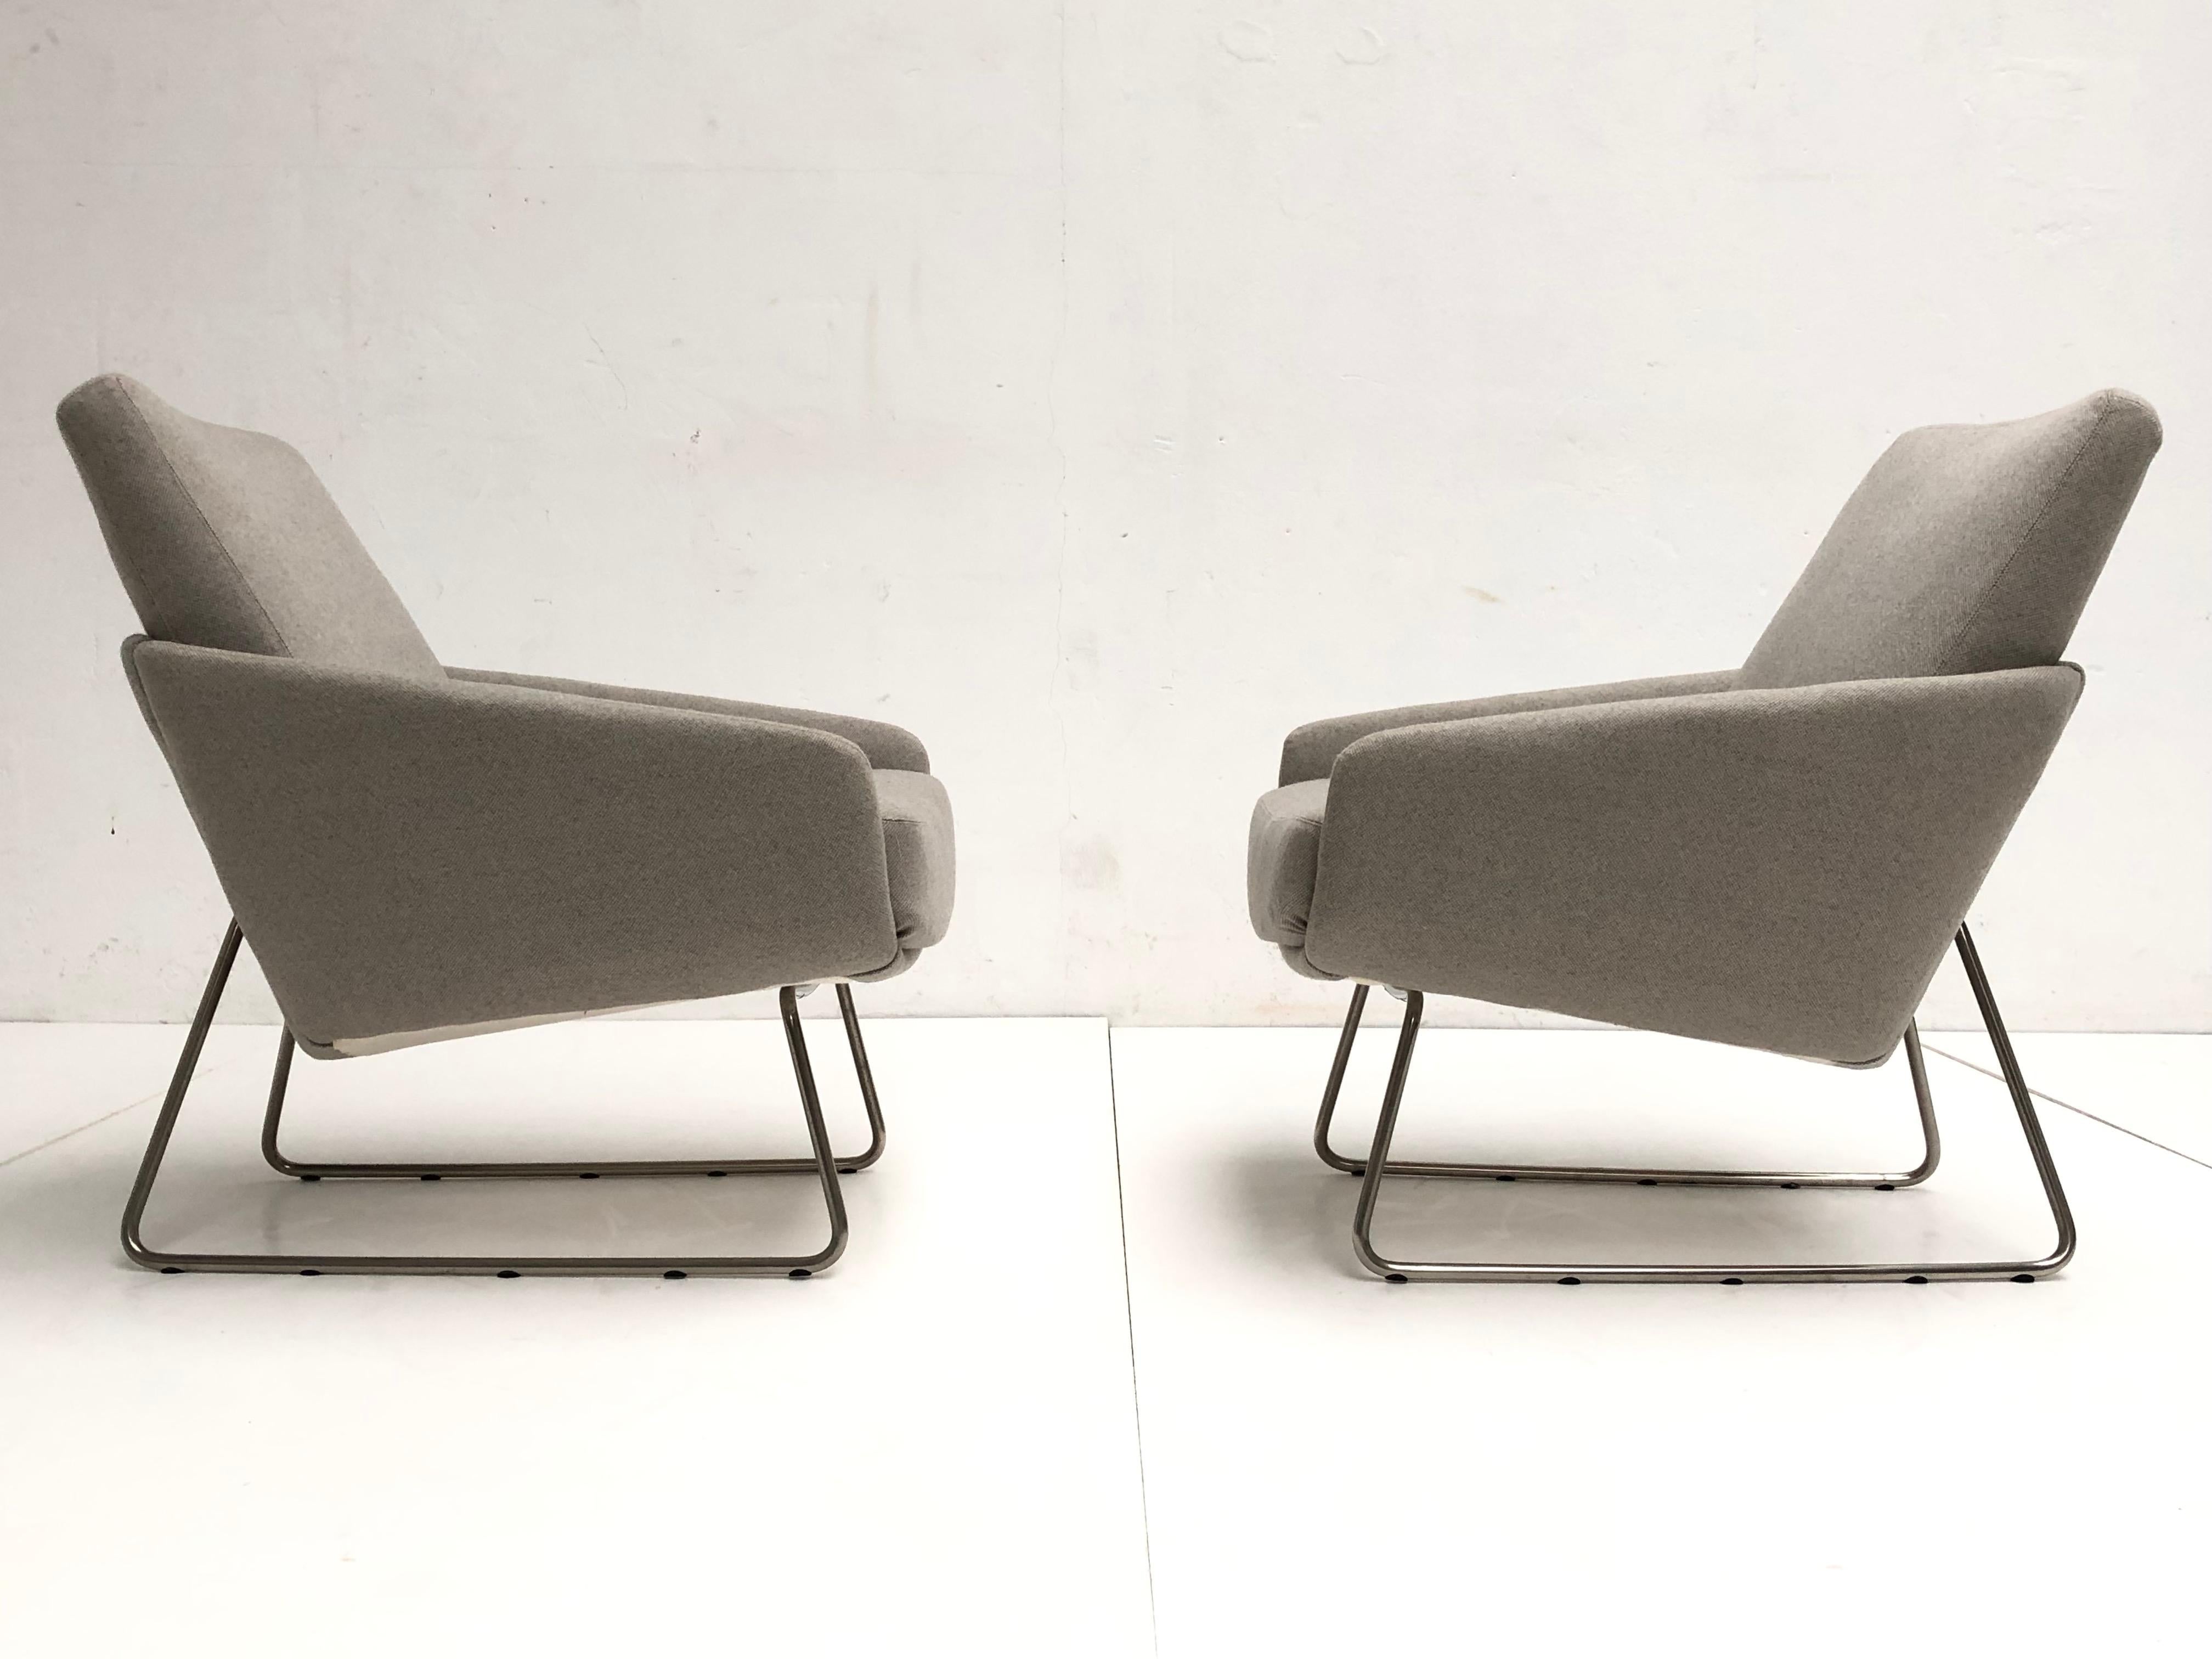 Pair of Artifort F165 Lounge Chairs with New Ploeg Wool Upholstery, circa 1955 In Good Condition For Sale In bergen op zoom, NL